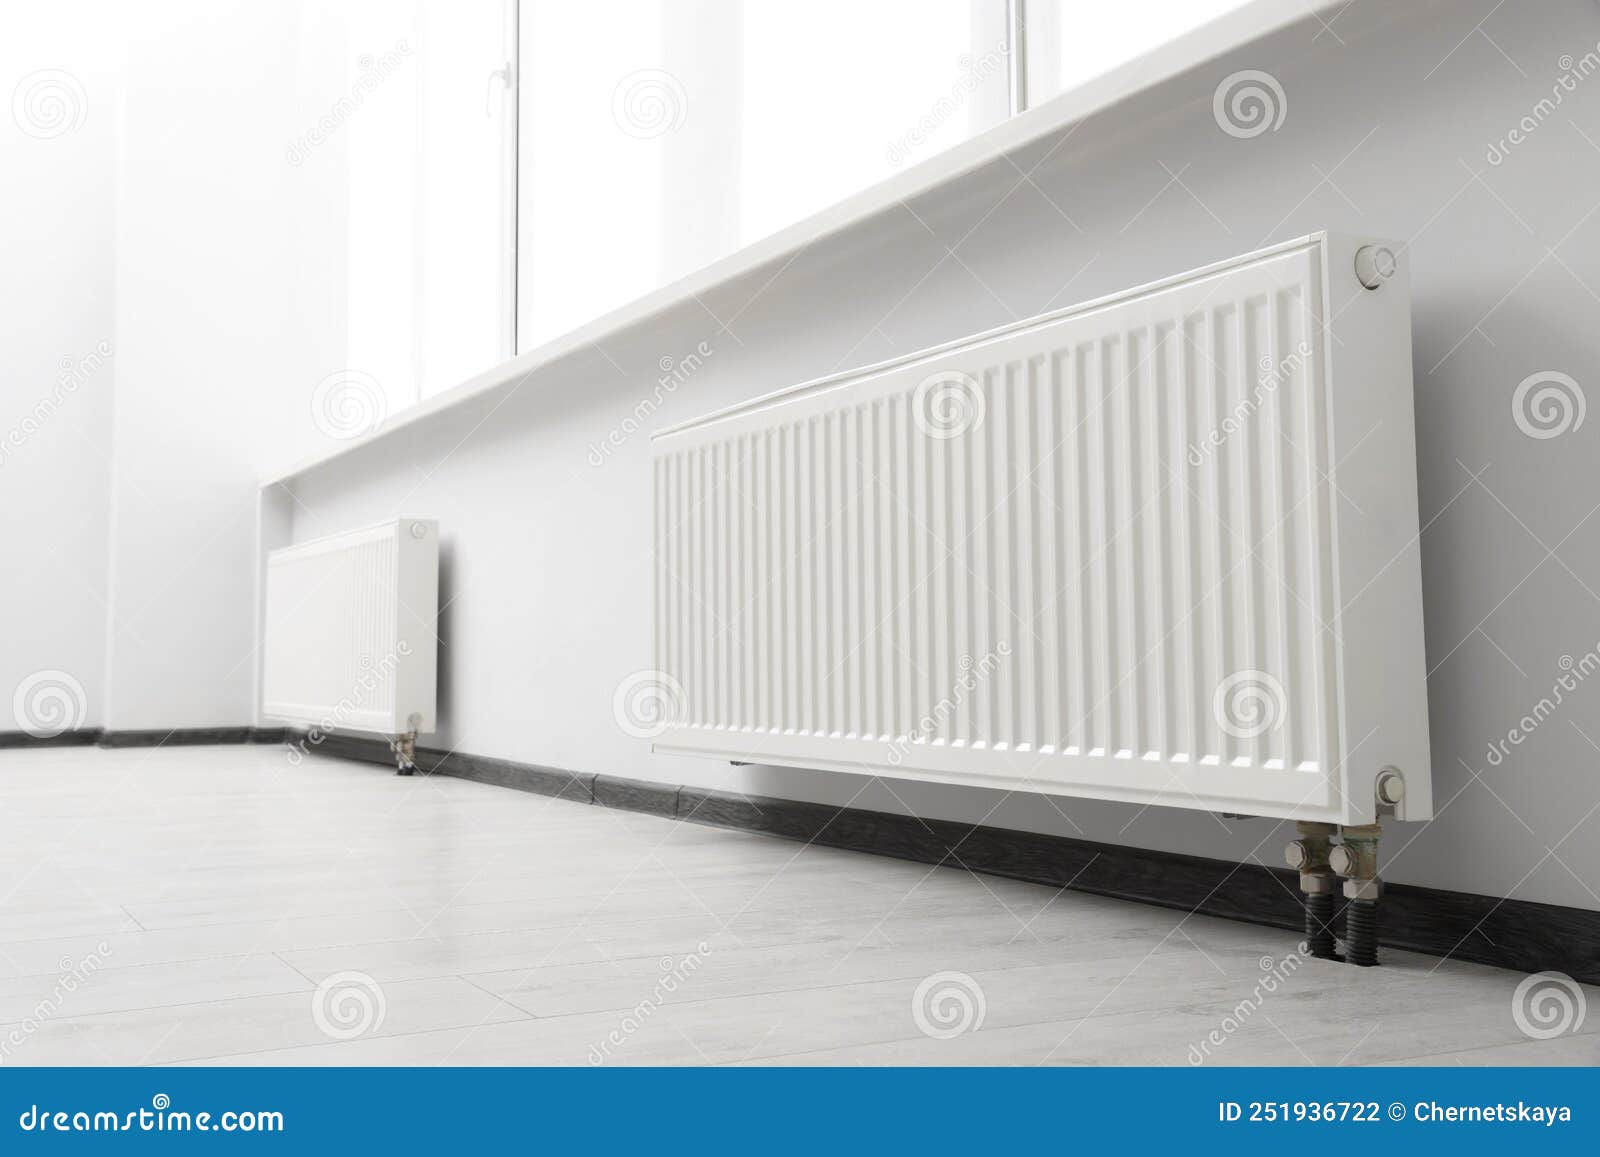 modern radiators in room. central heating system